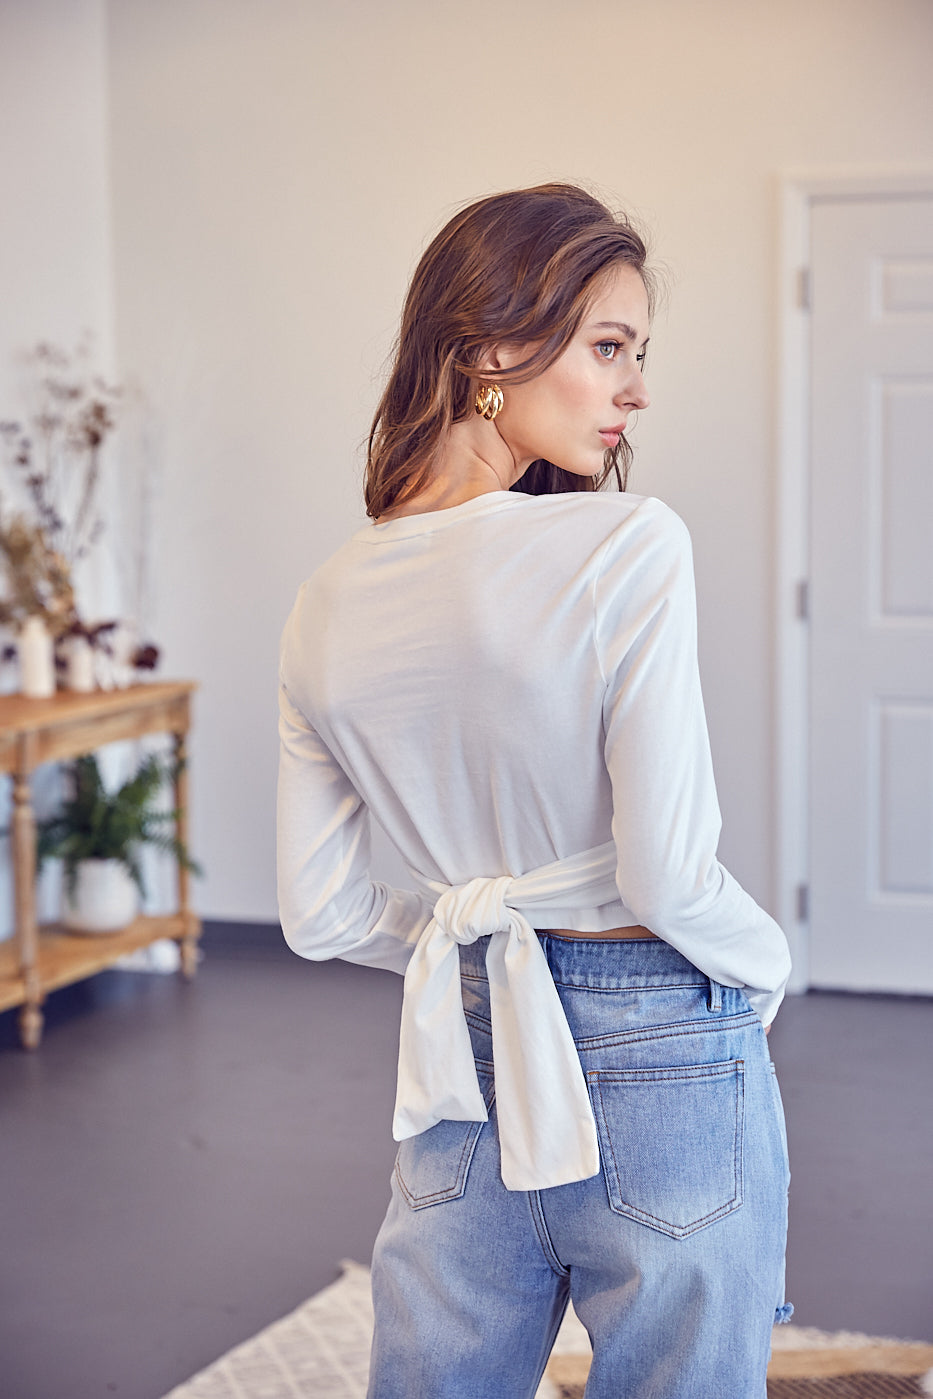 A model wearing a white front cross tie top backside view against a white wall. 